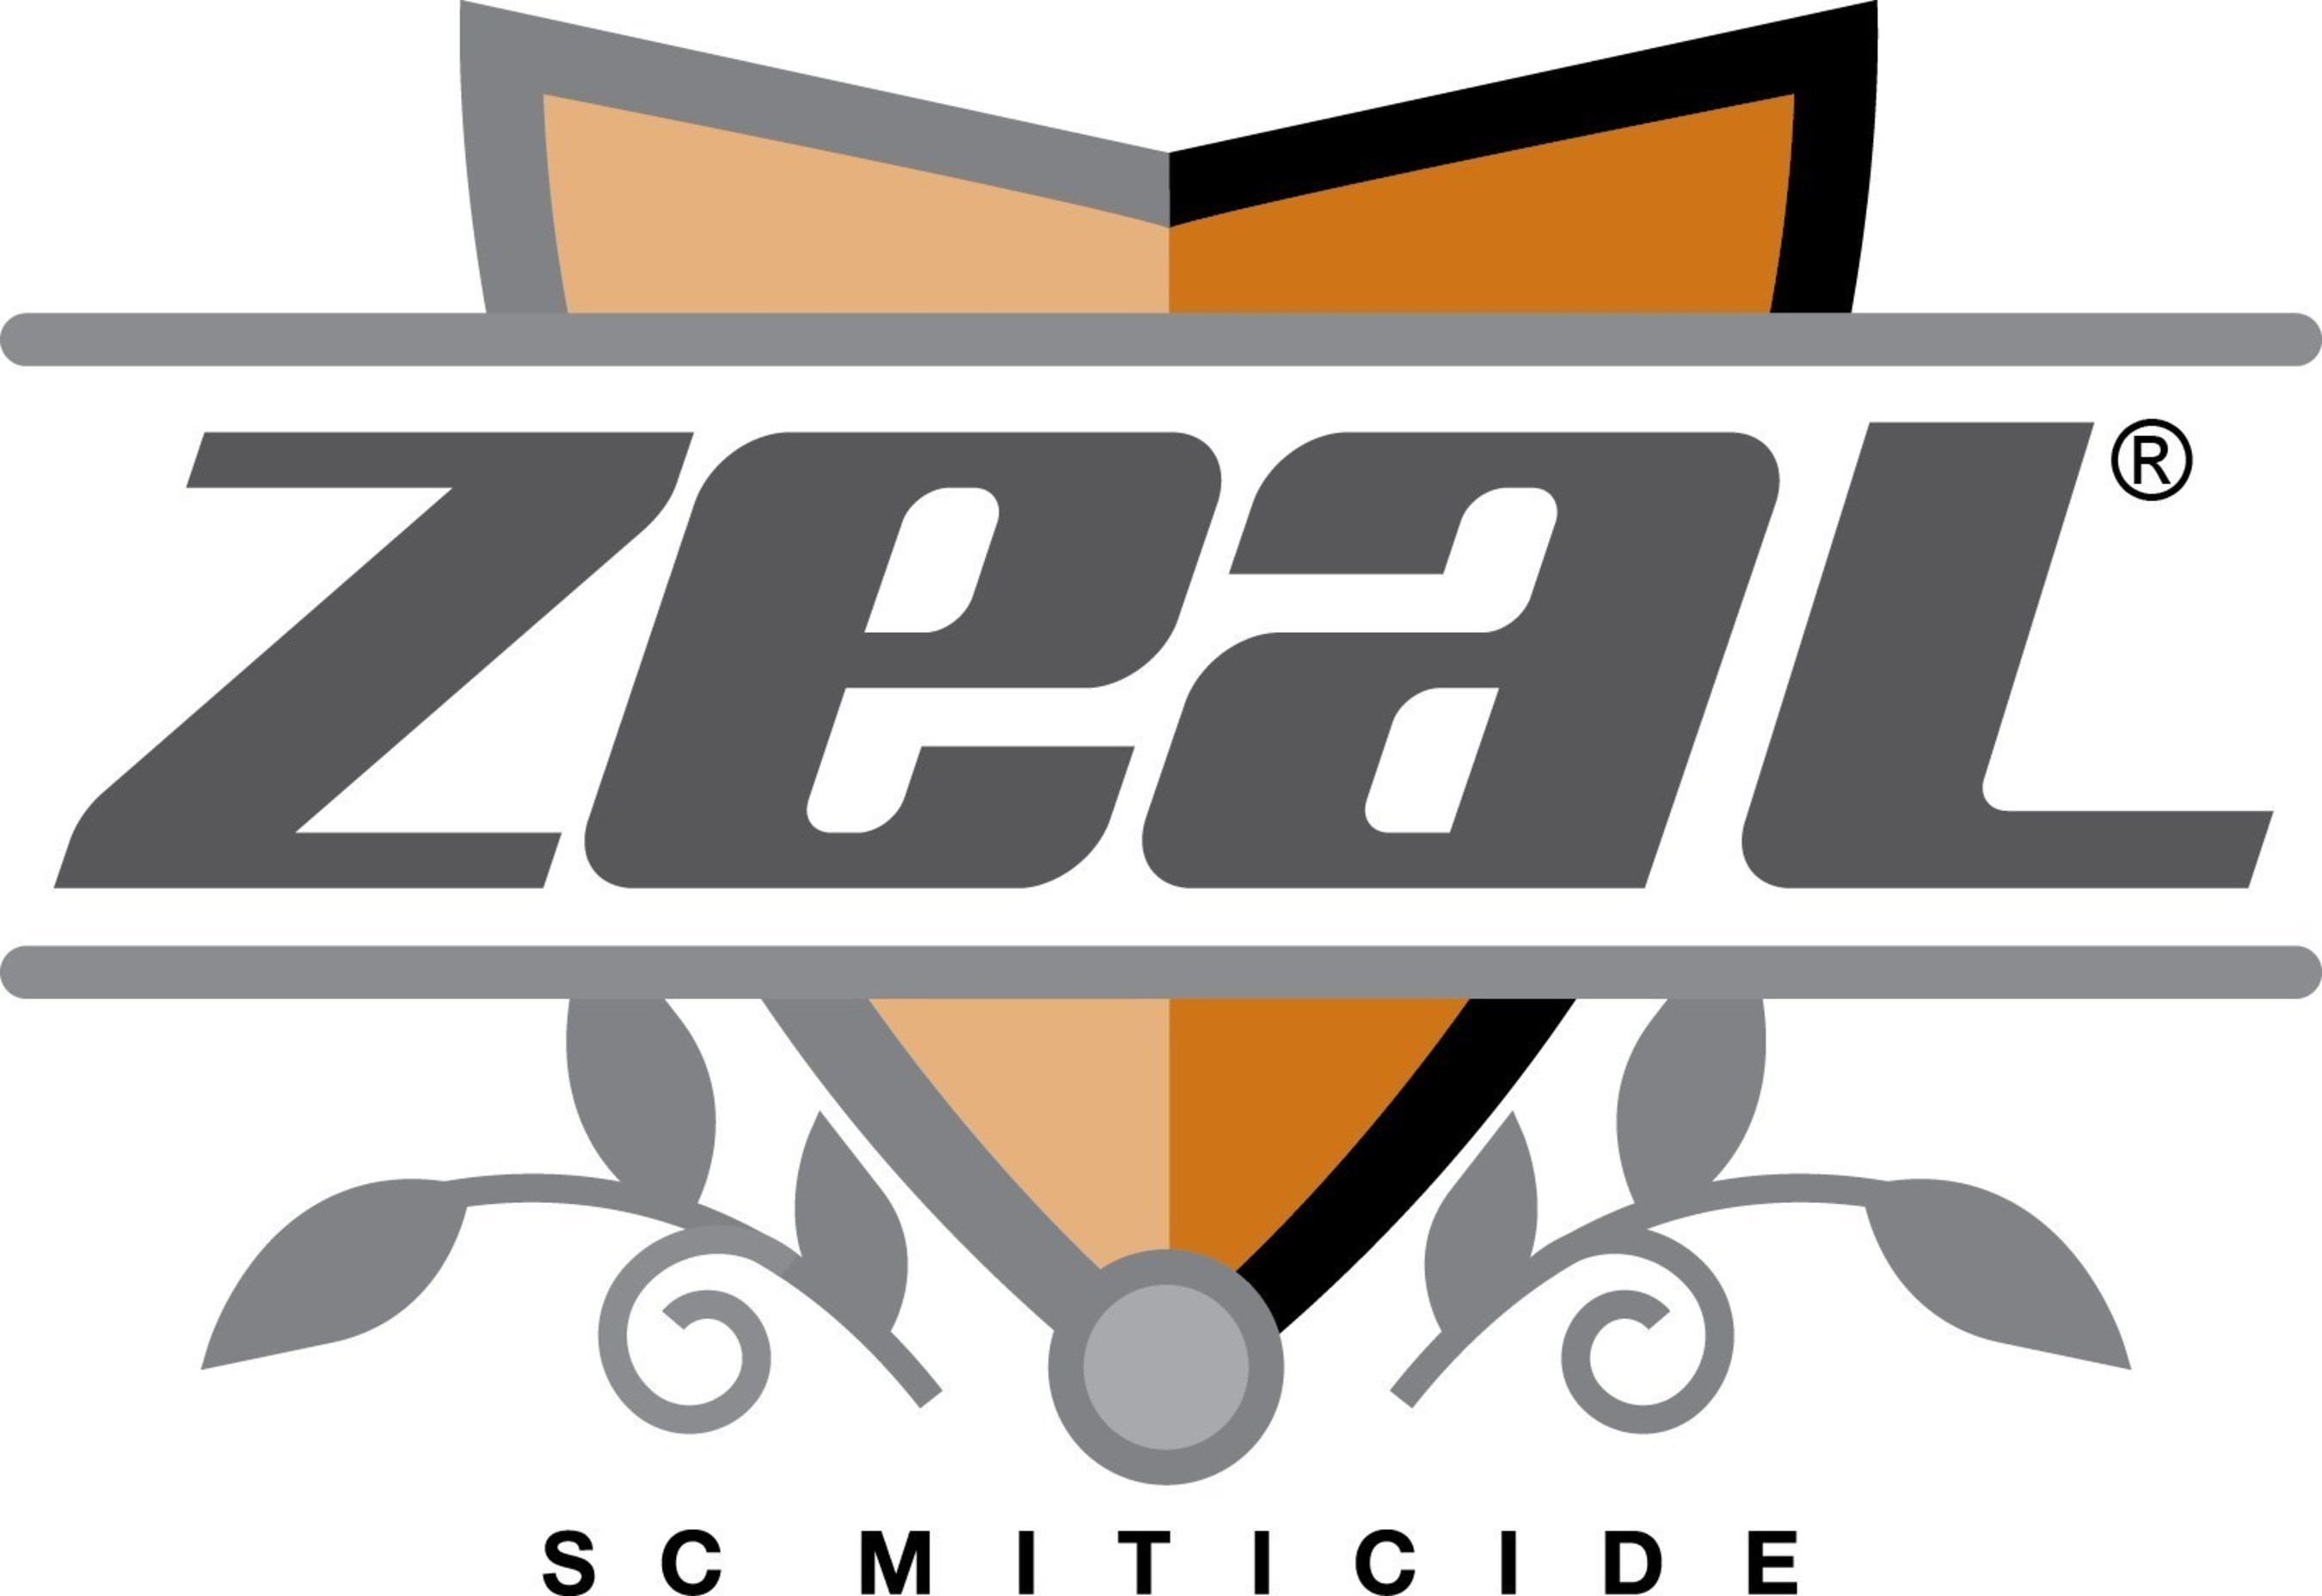 Zeal SC Miticide, a proven residual miticide, is now available for soybeans